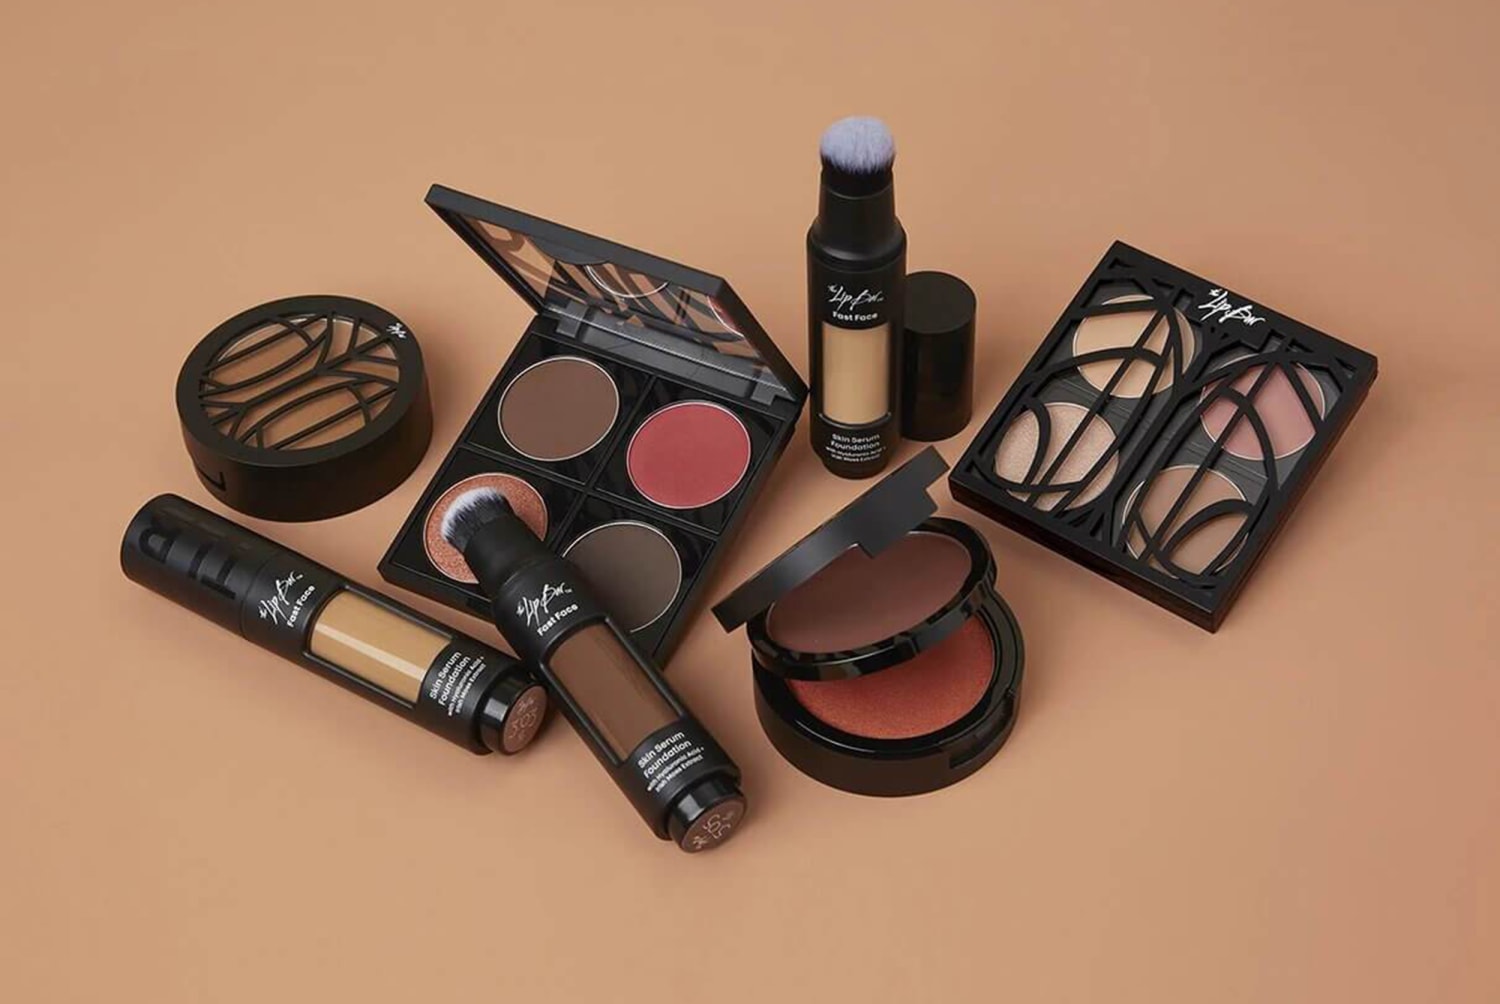 20 Black Owned Makeup Brands You Should Know